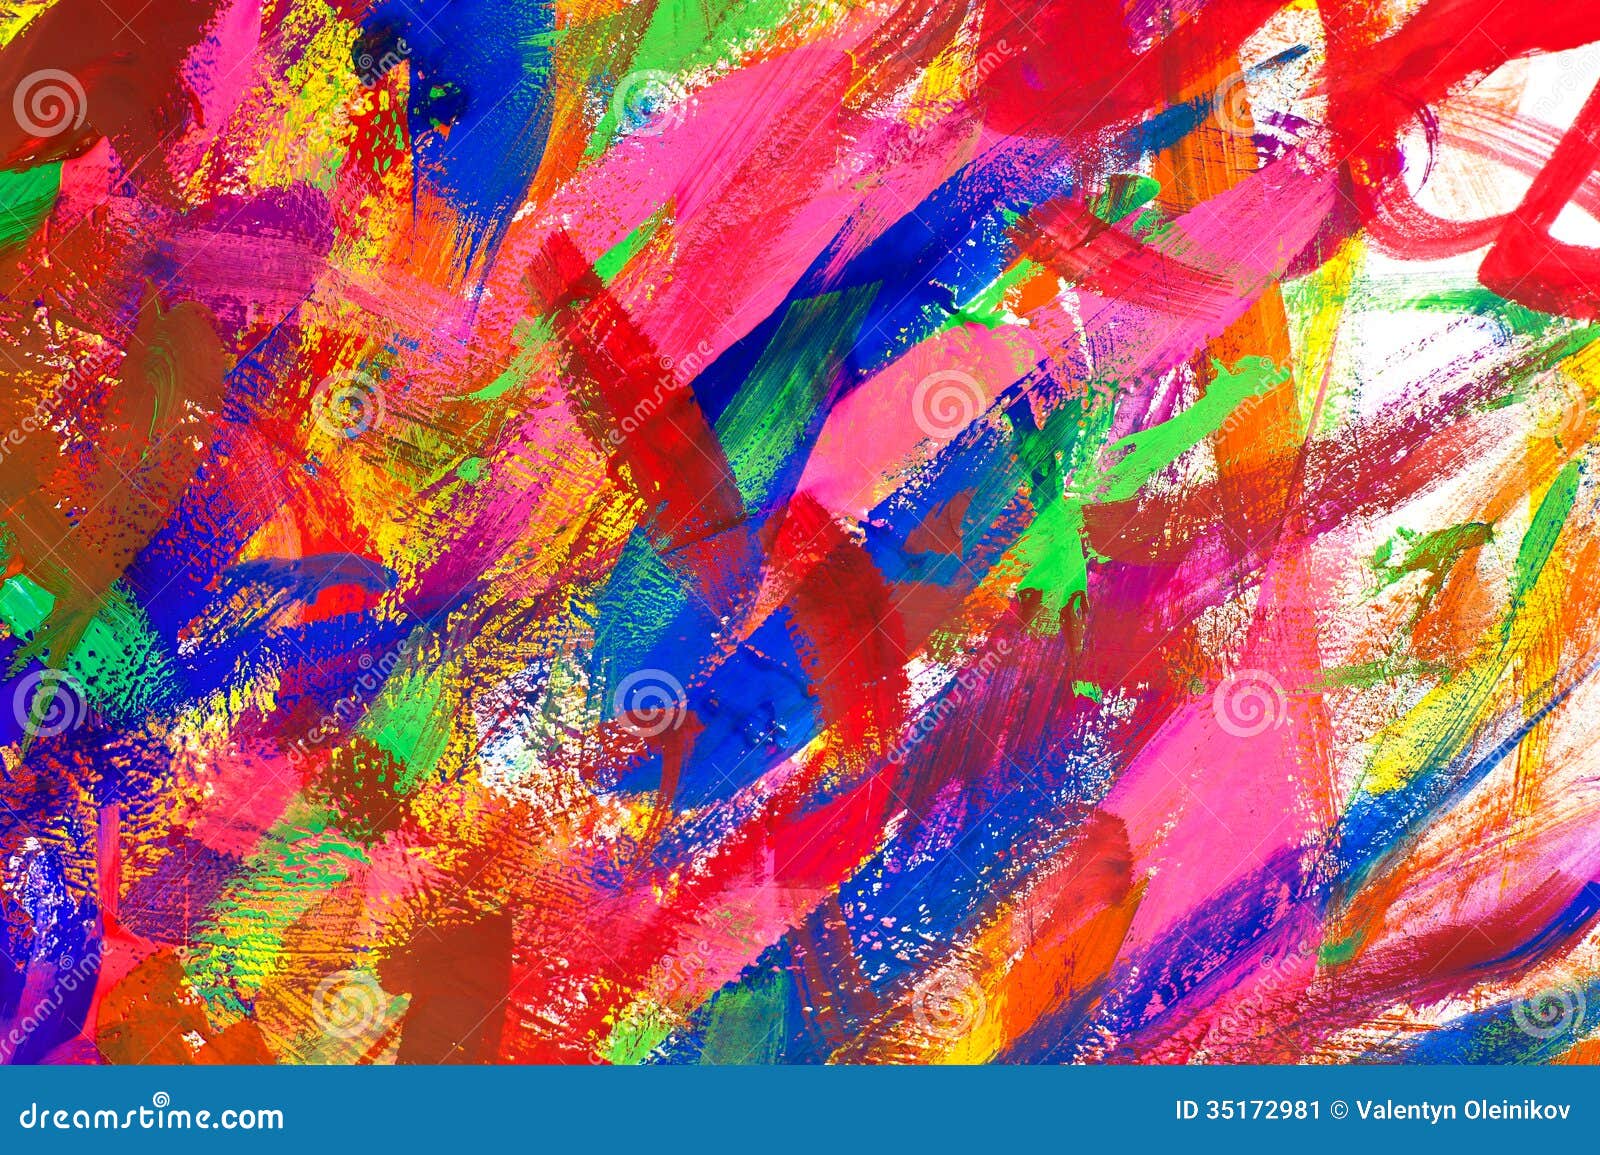 Abstract Colorful Brush Strokes Background Stock Image - Image of texture,  abstract: 35172981